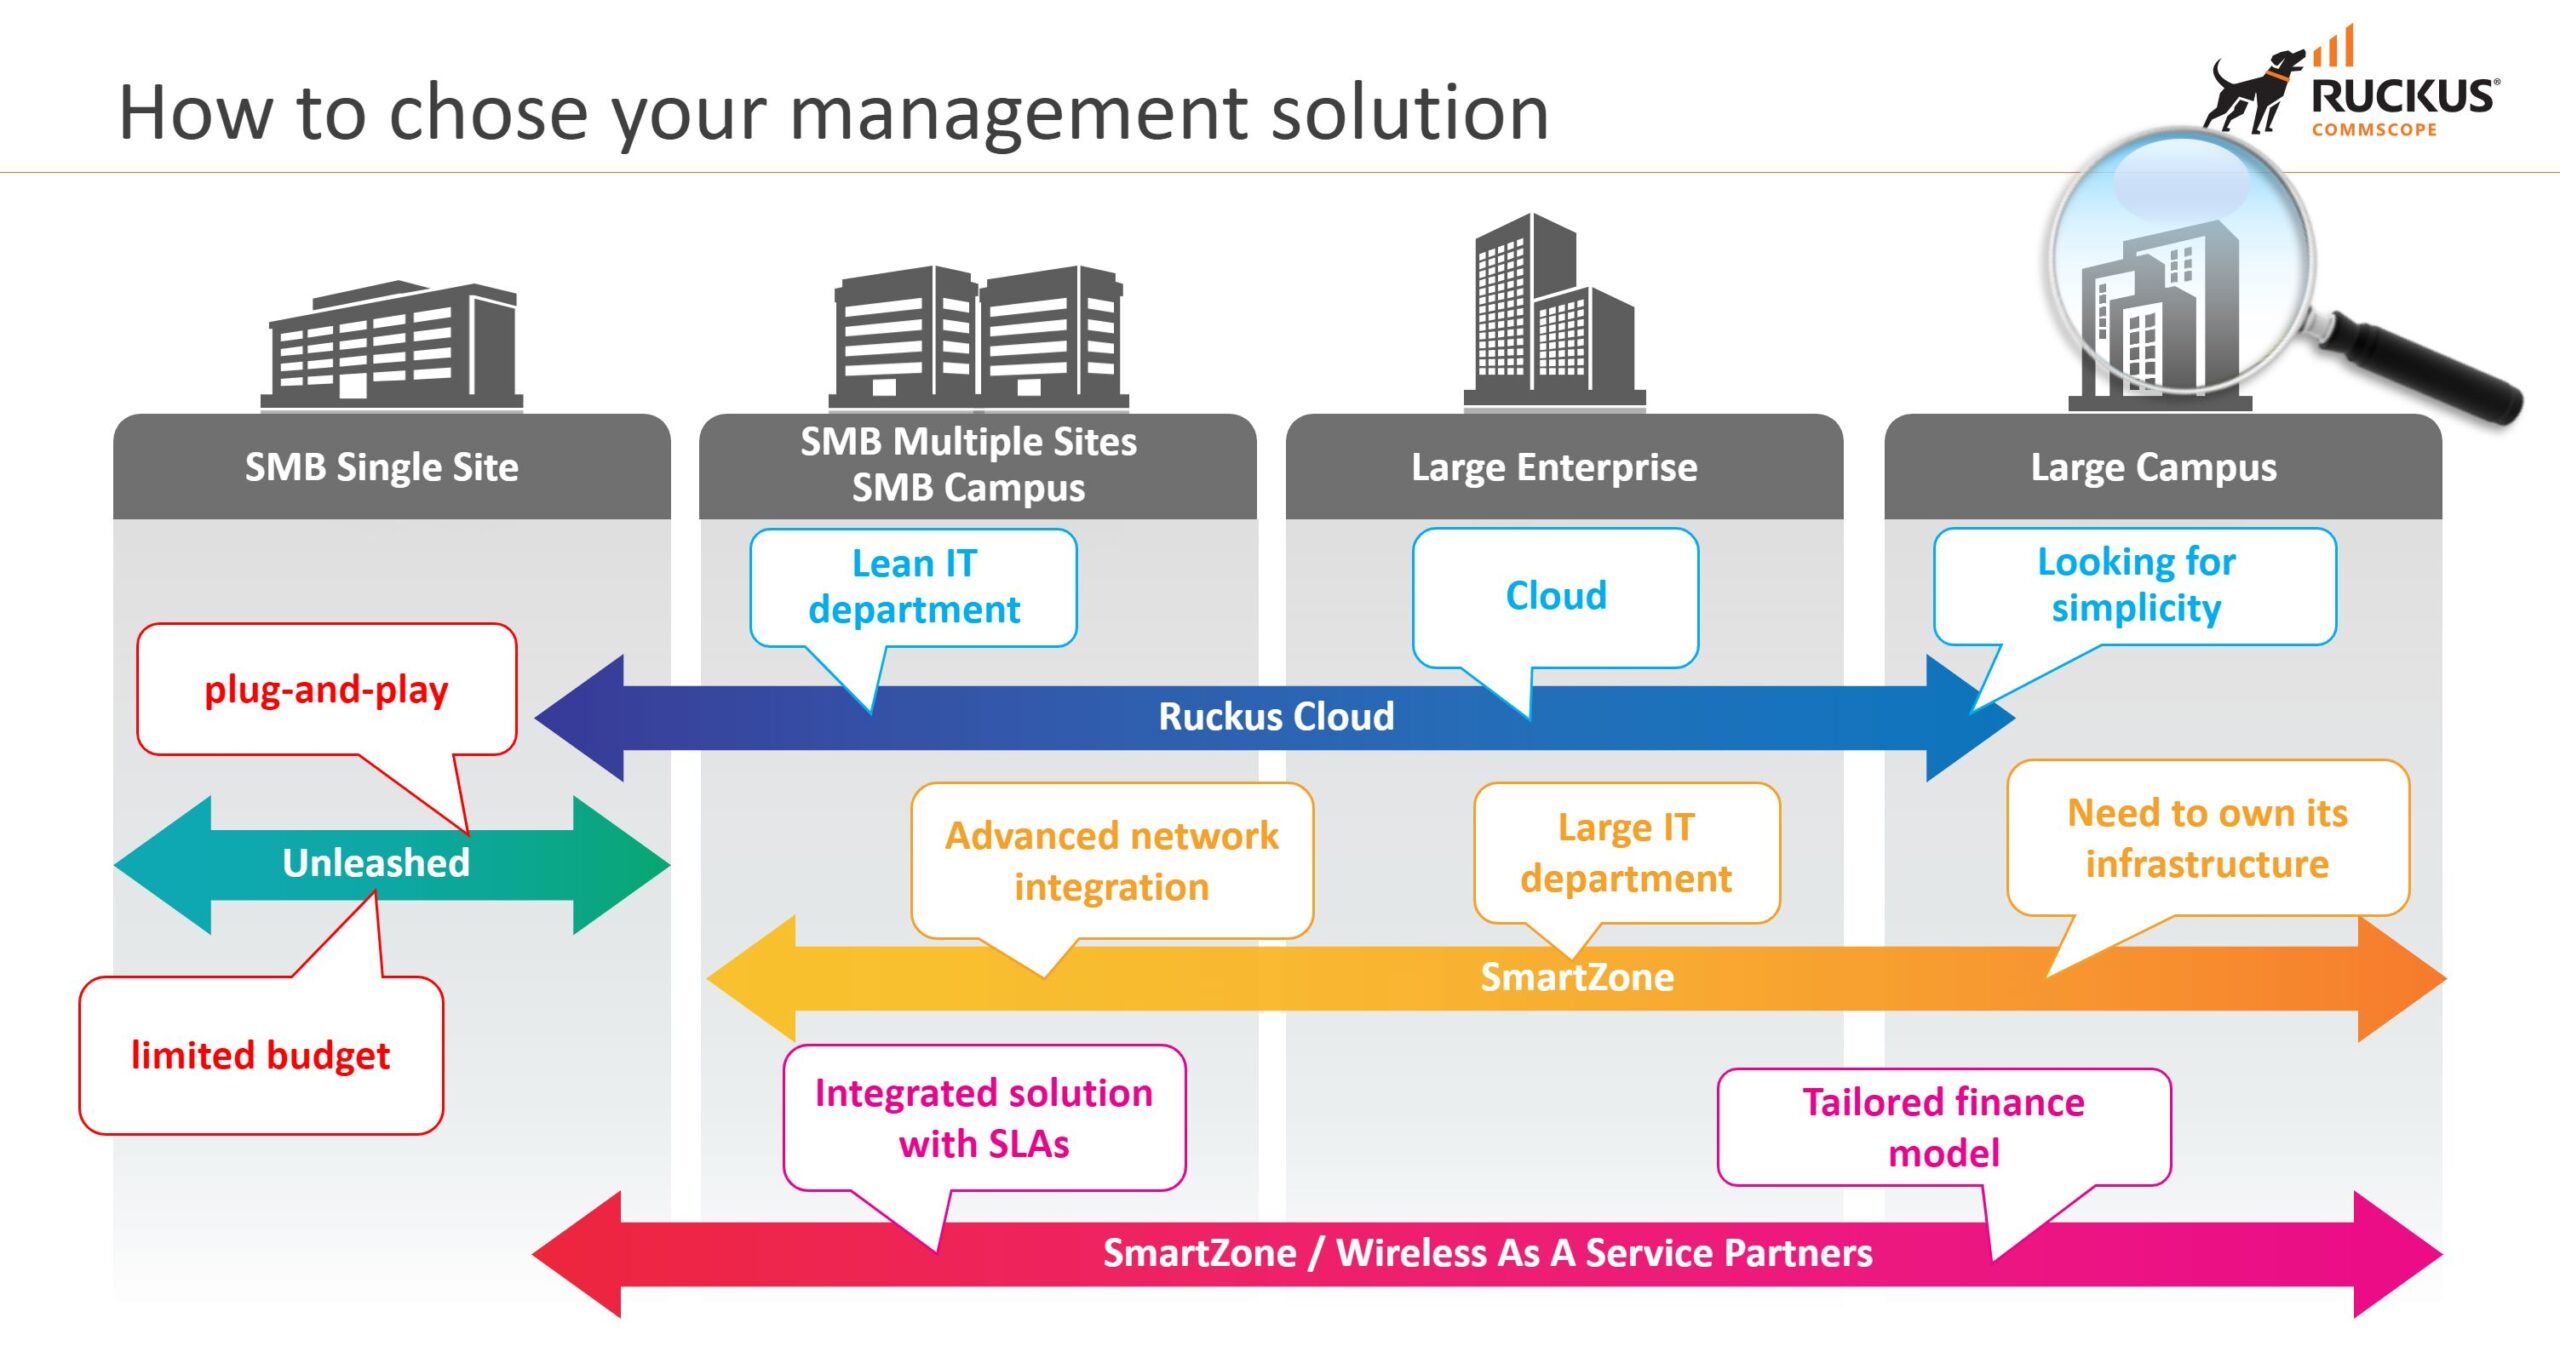 Choosing the right RUCKUS managed solution